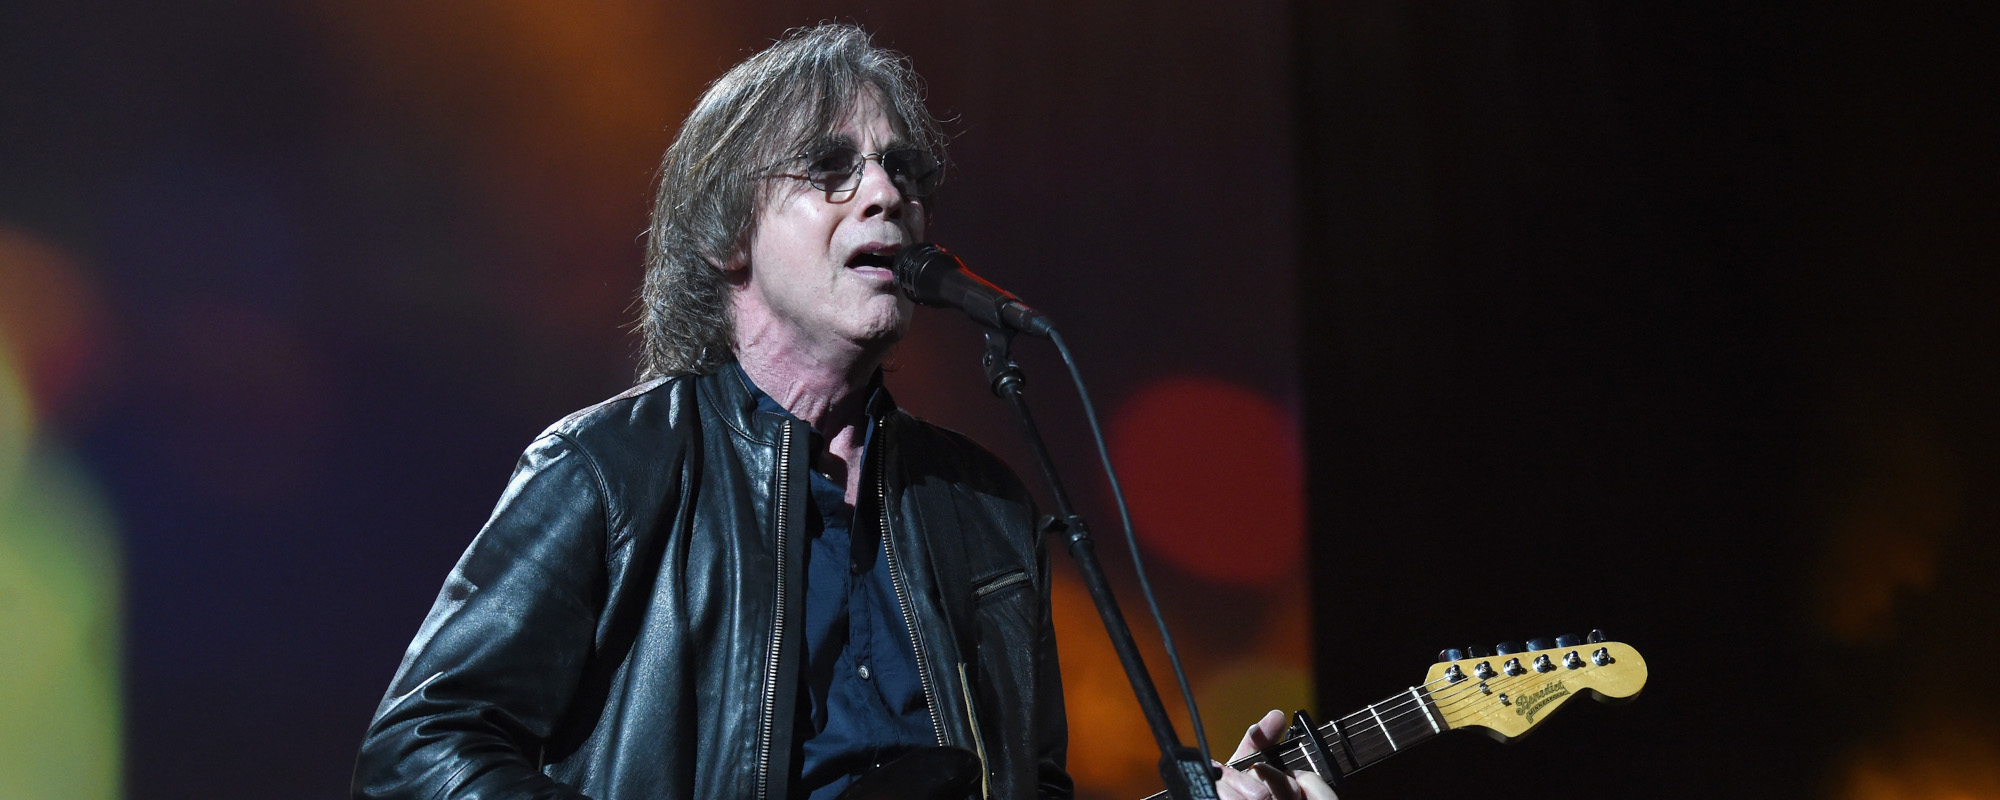 Ranking the Top 5 Jackson Browne Songs of the ’80s